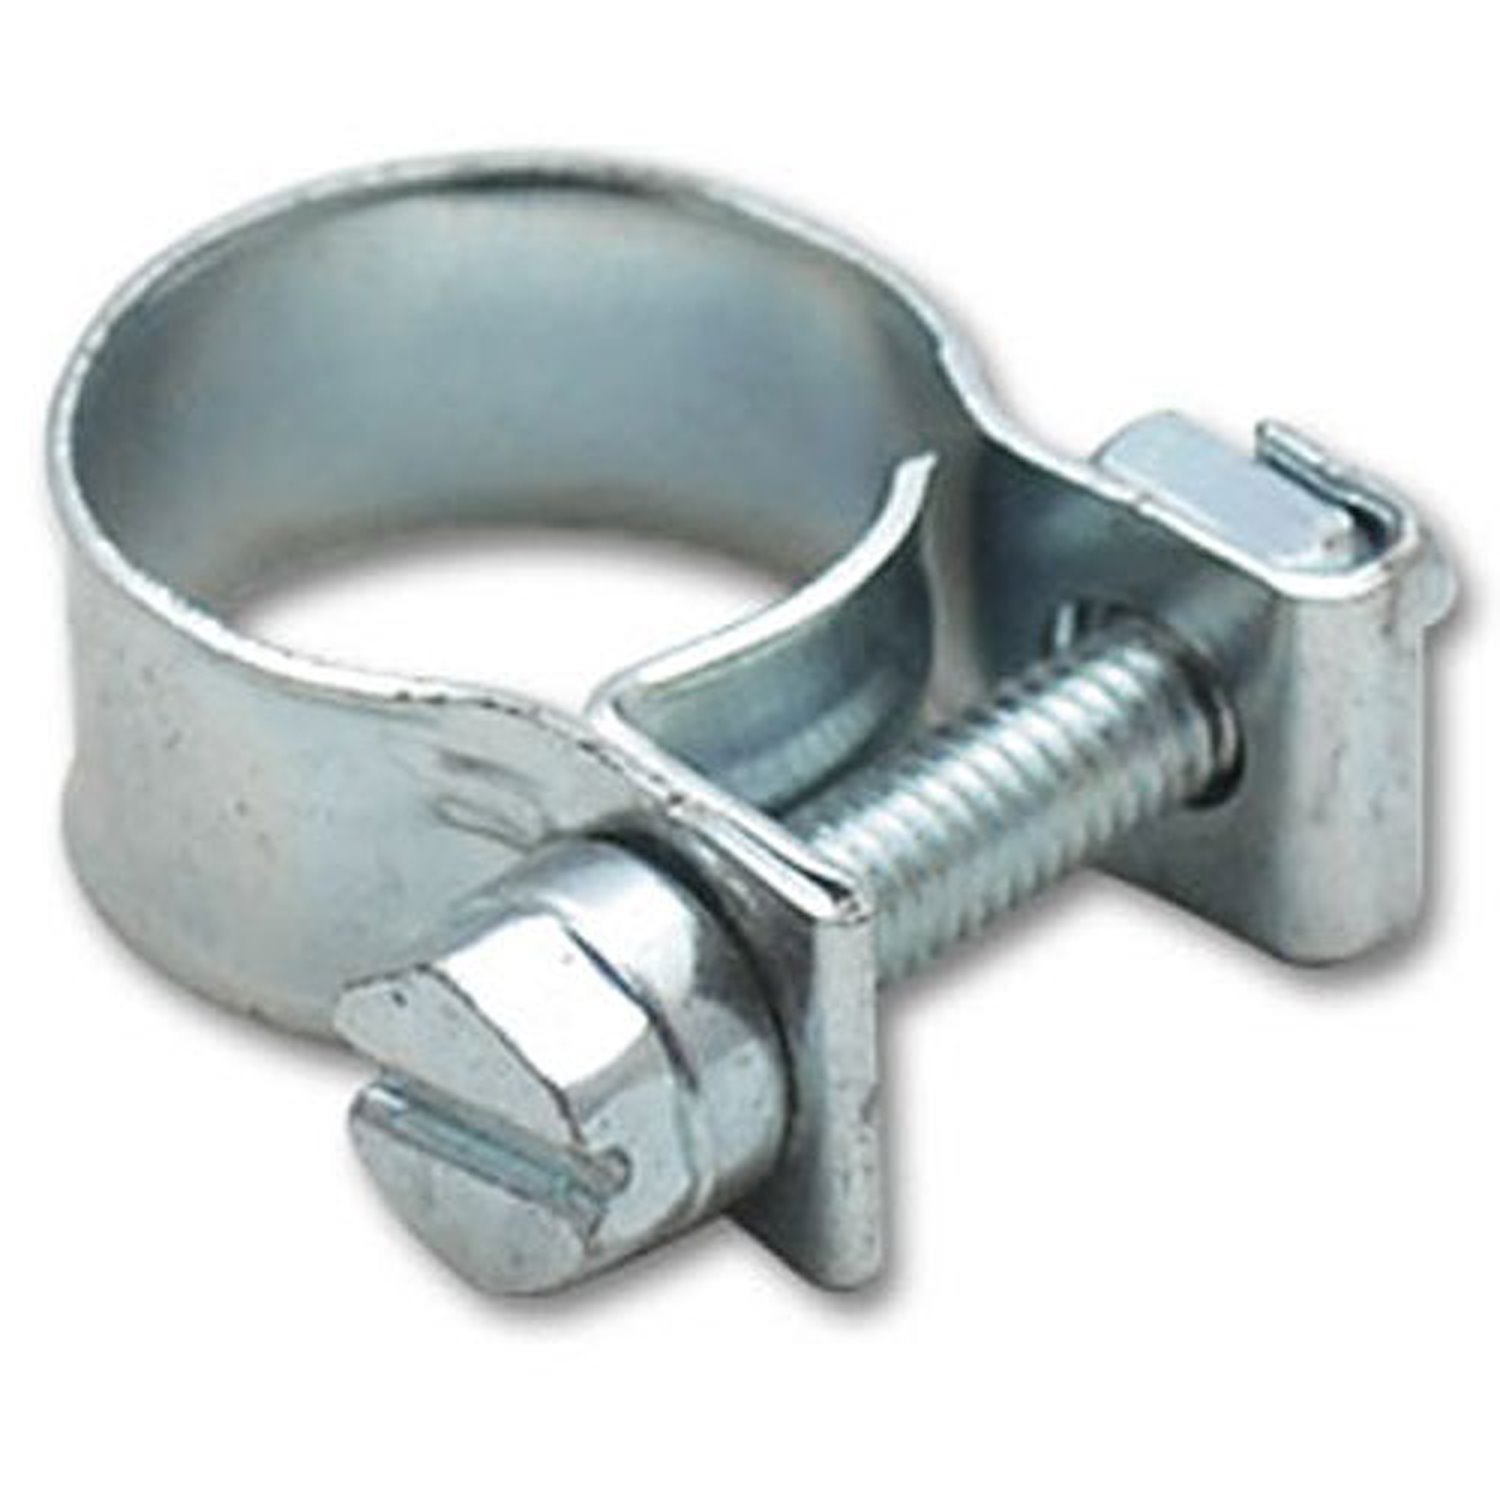 Fuel Injector Style Mini Hose Clamps 7mm - 9mm